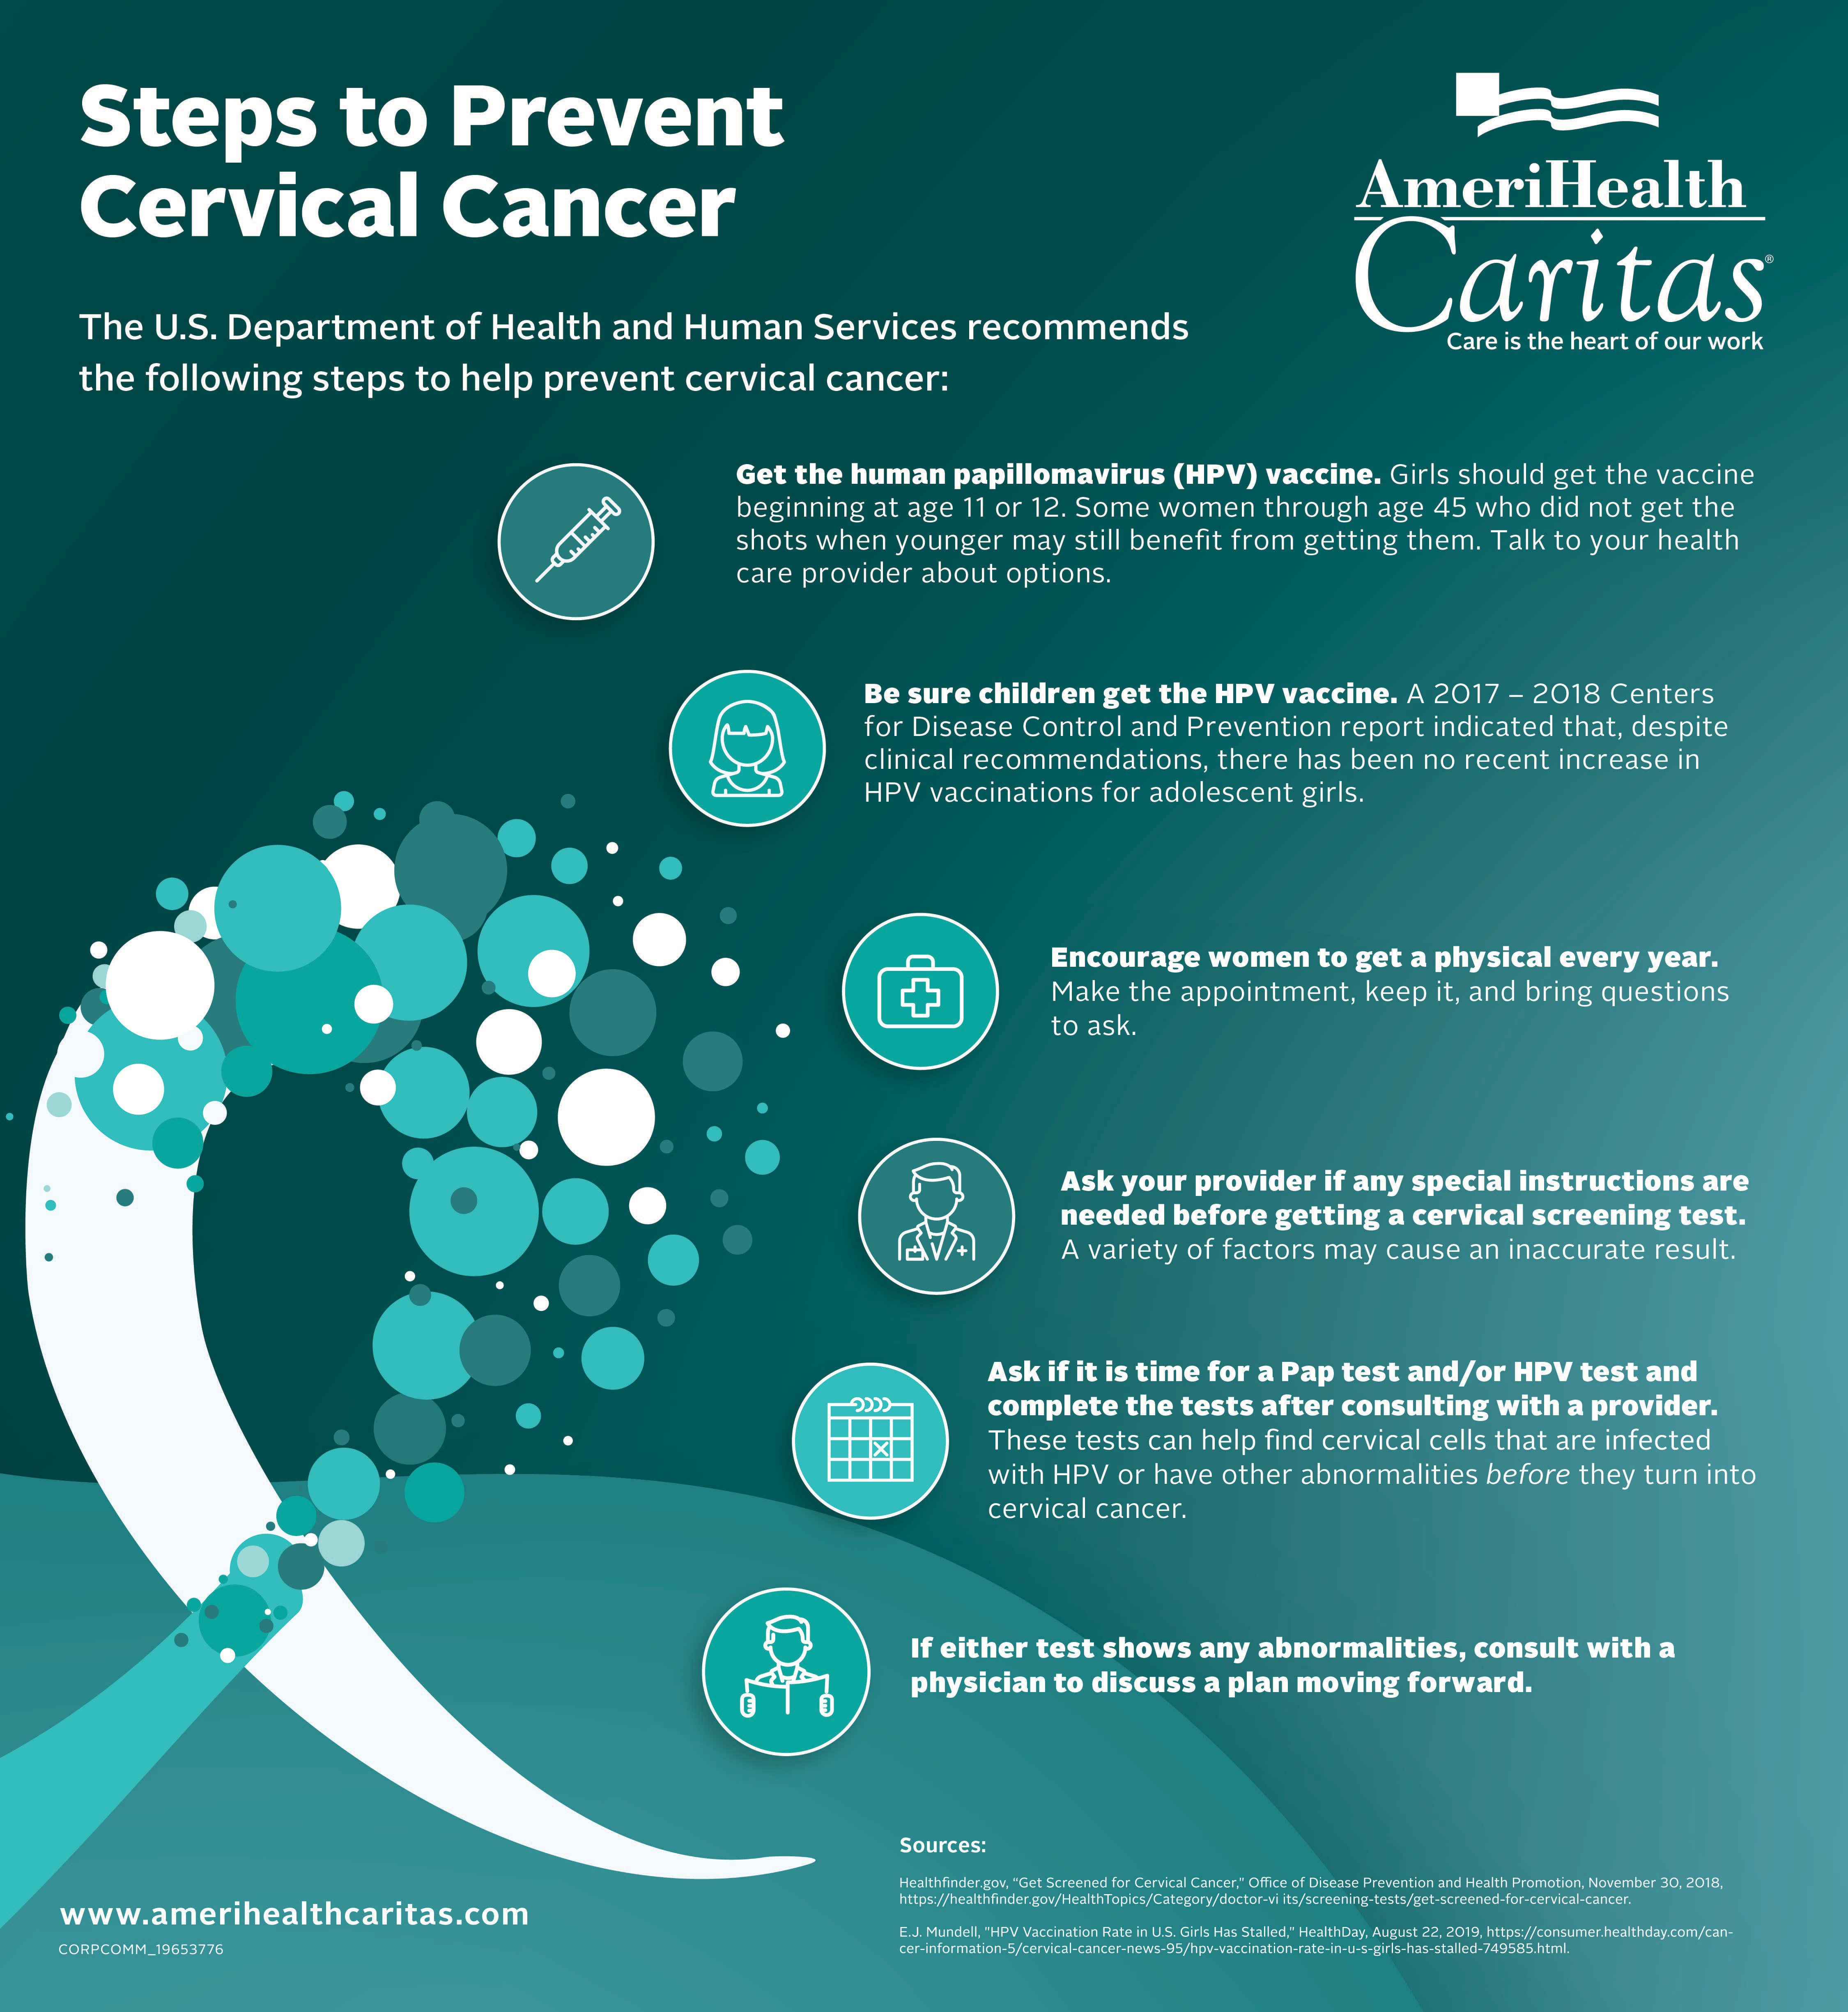 CORPCOMM_1cervical_cancer_infographic